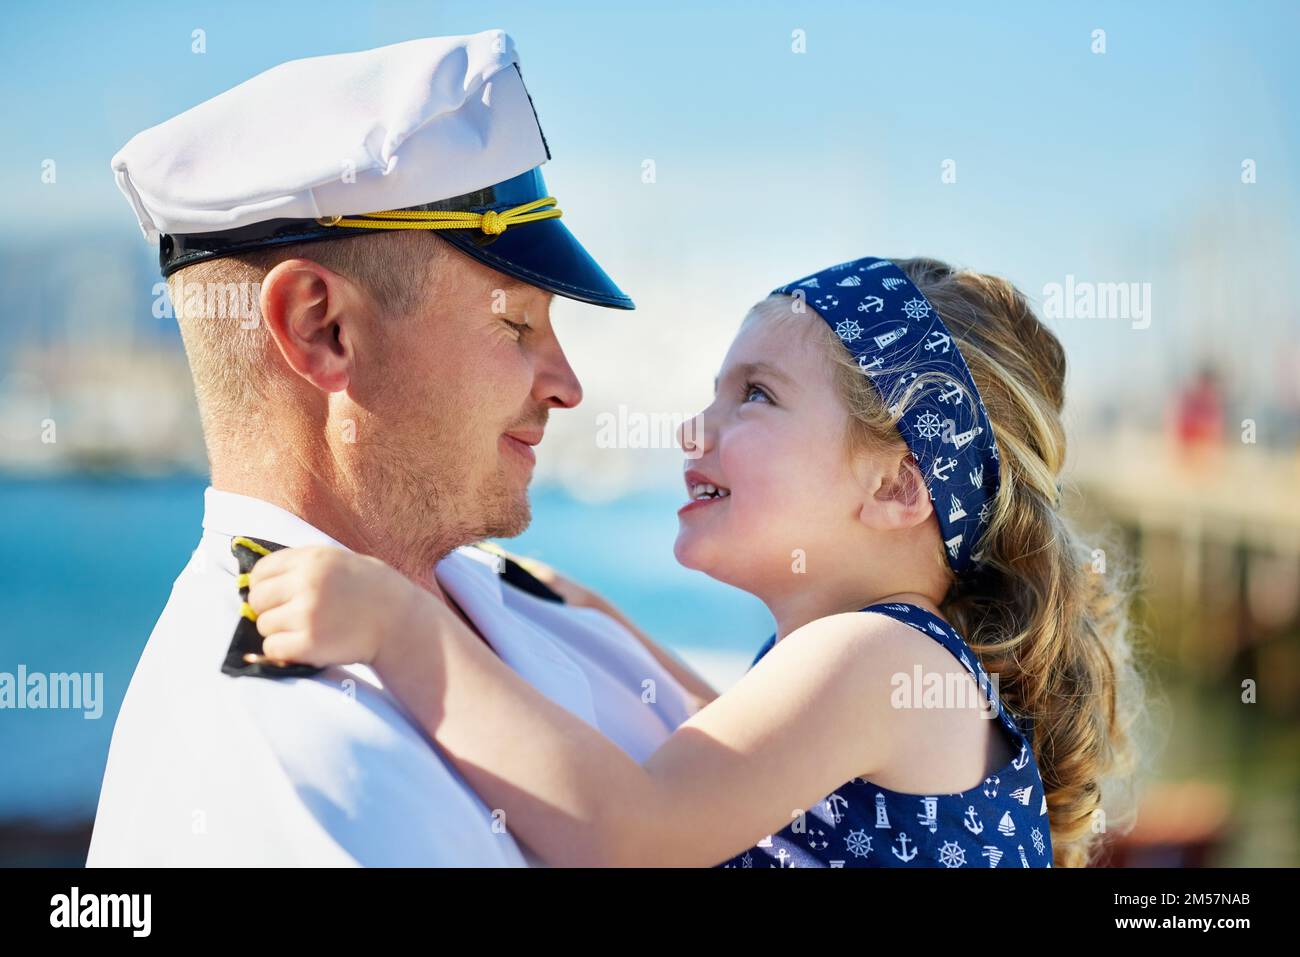 Her father is her hero. a father in a navy uniform bonding with his little girl on the dock. Stock Photo